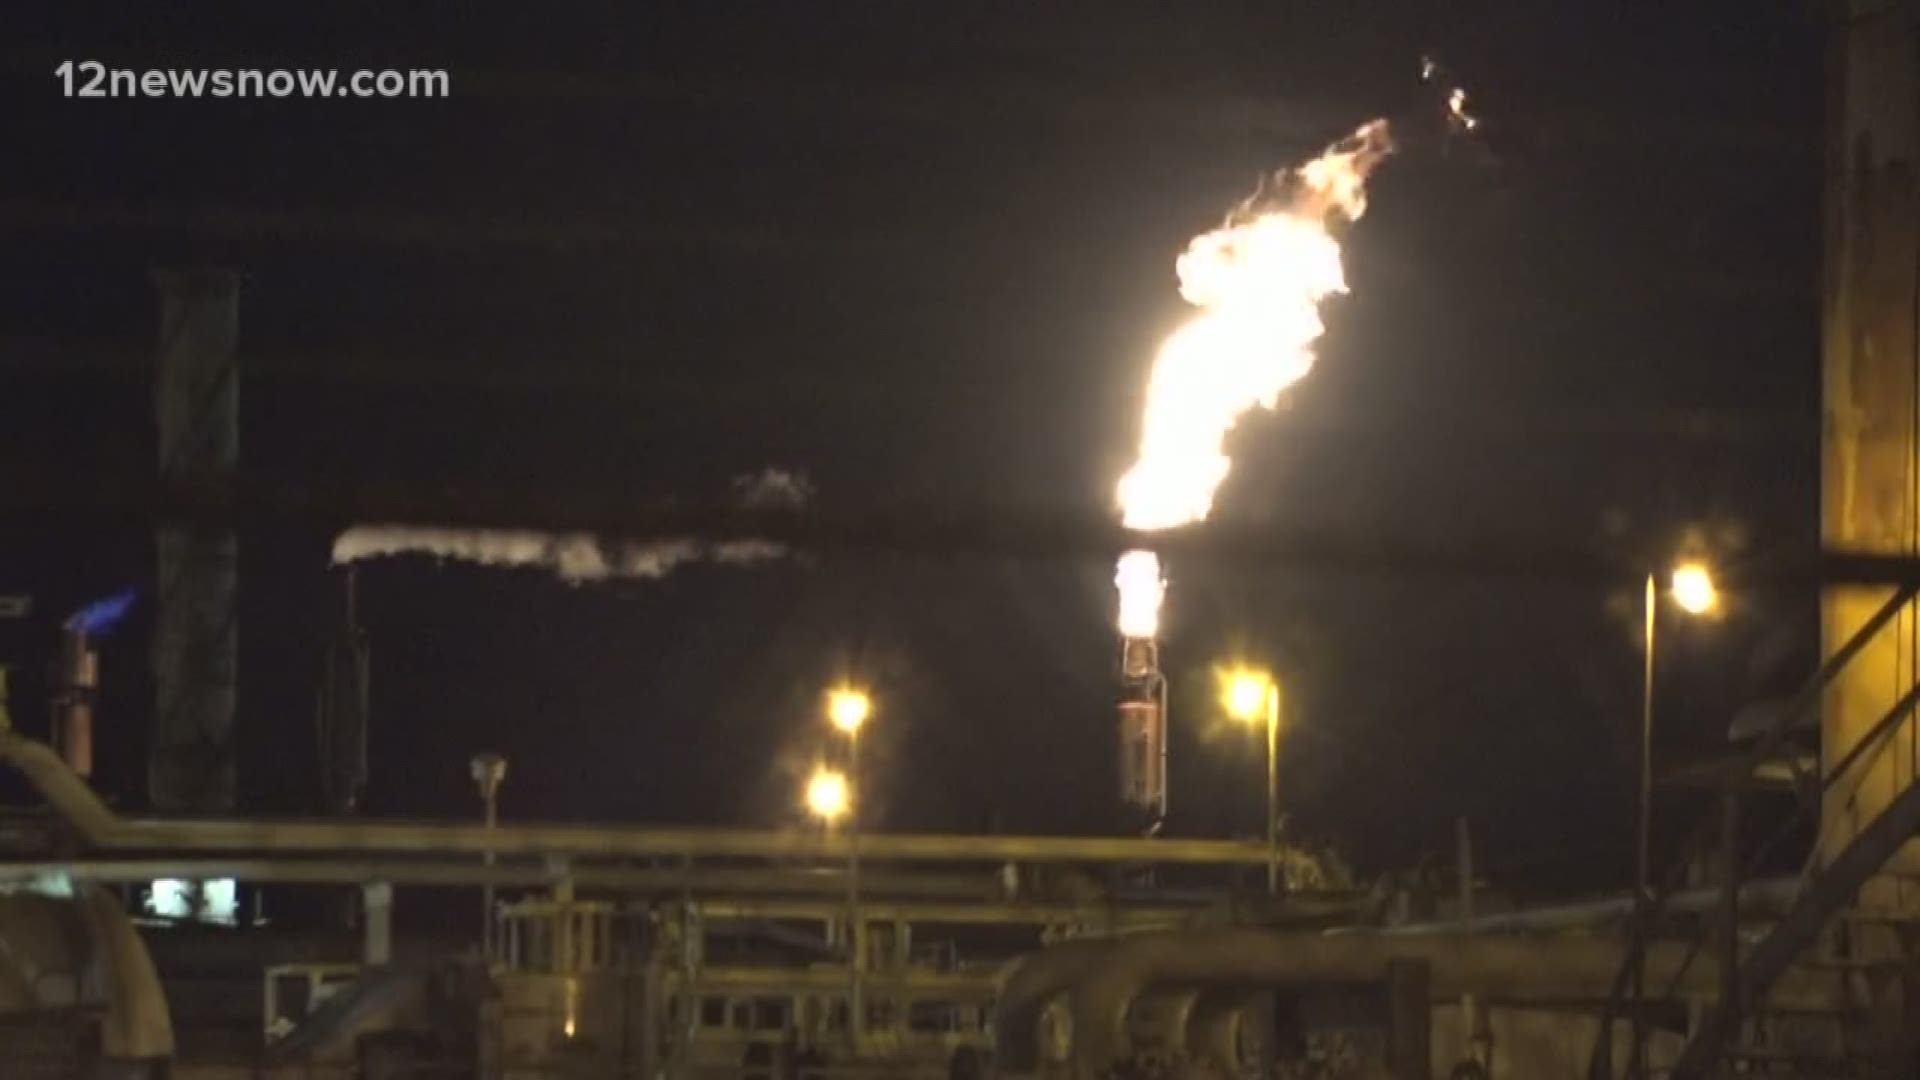 It says the process of safely flaring is an environmentally approved measure and is used to burn hydrocarbons that cannot be processed during a unit shutdown.